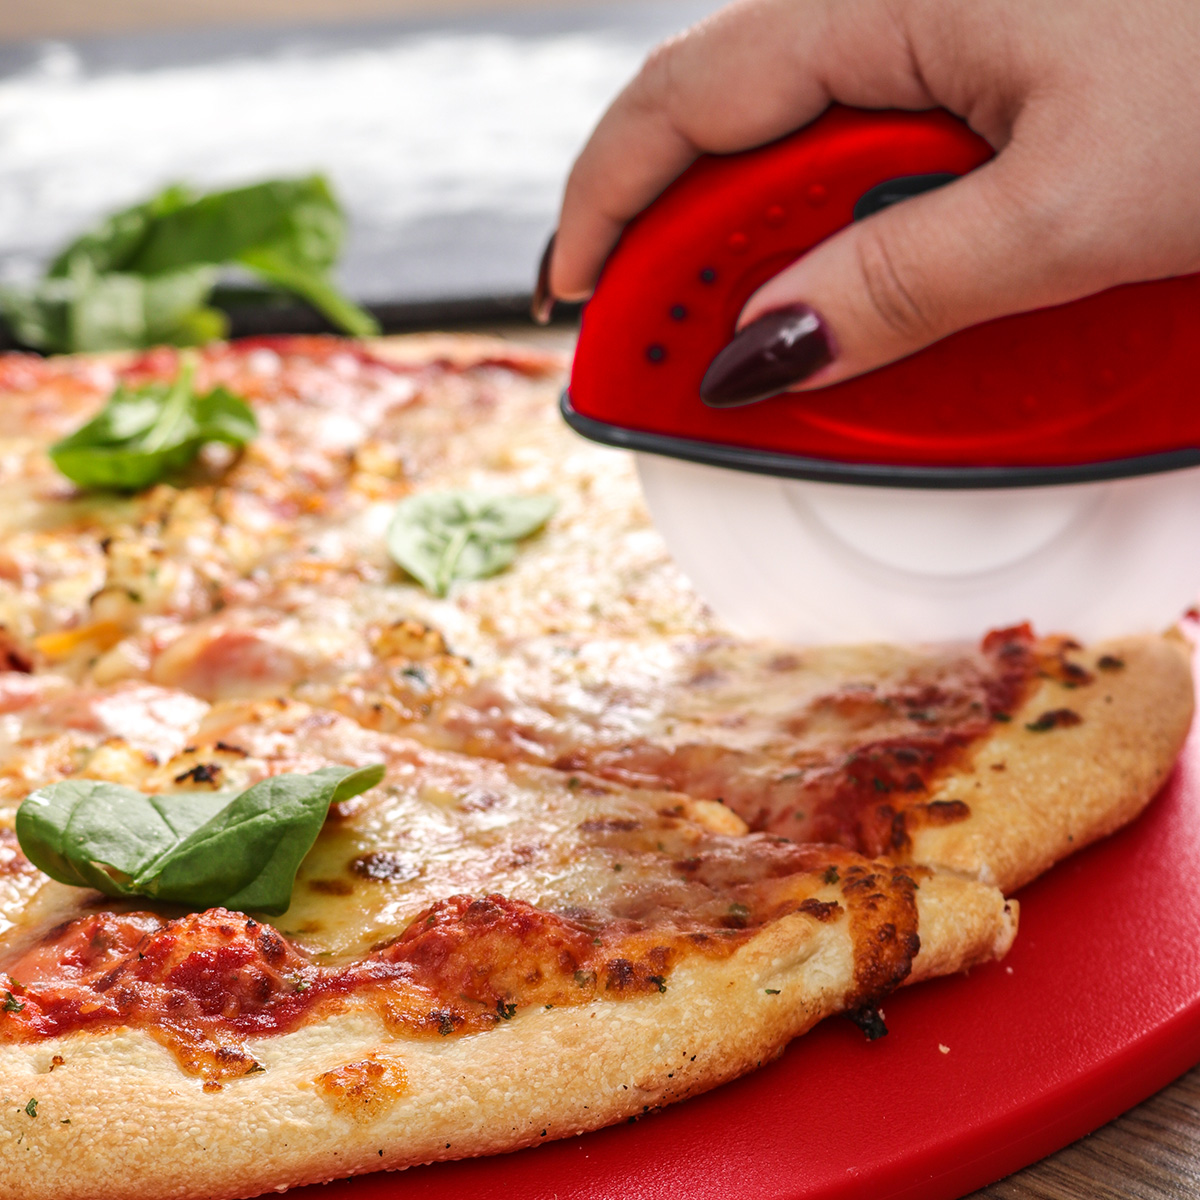 Oxo Softworks Pizza Wheel : Target